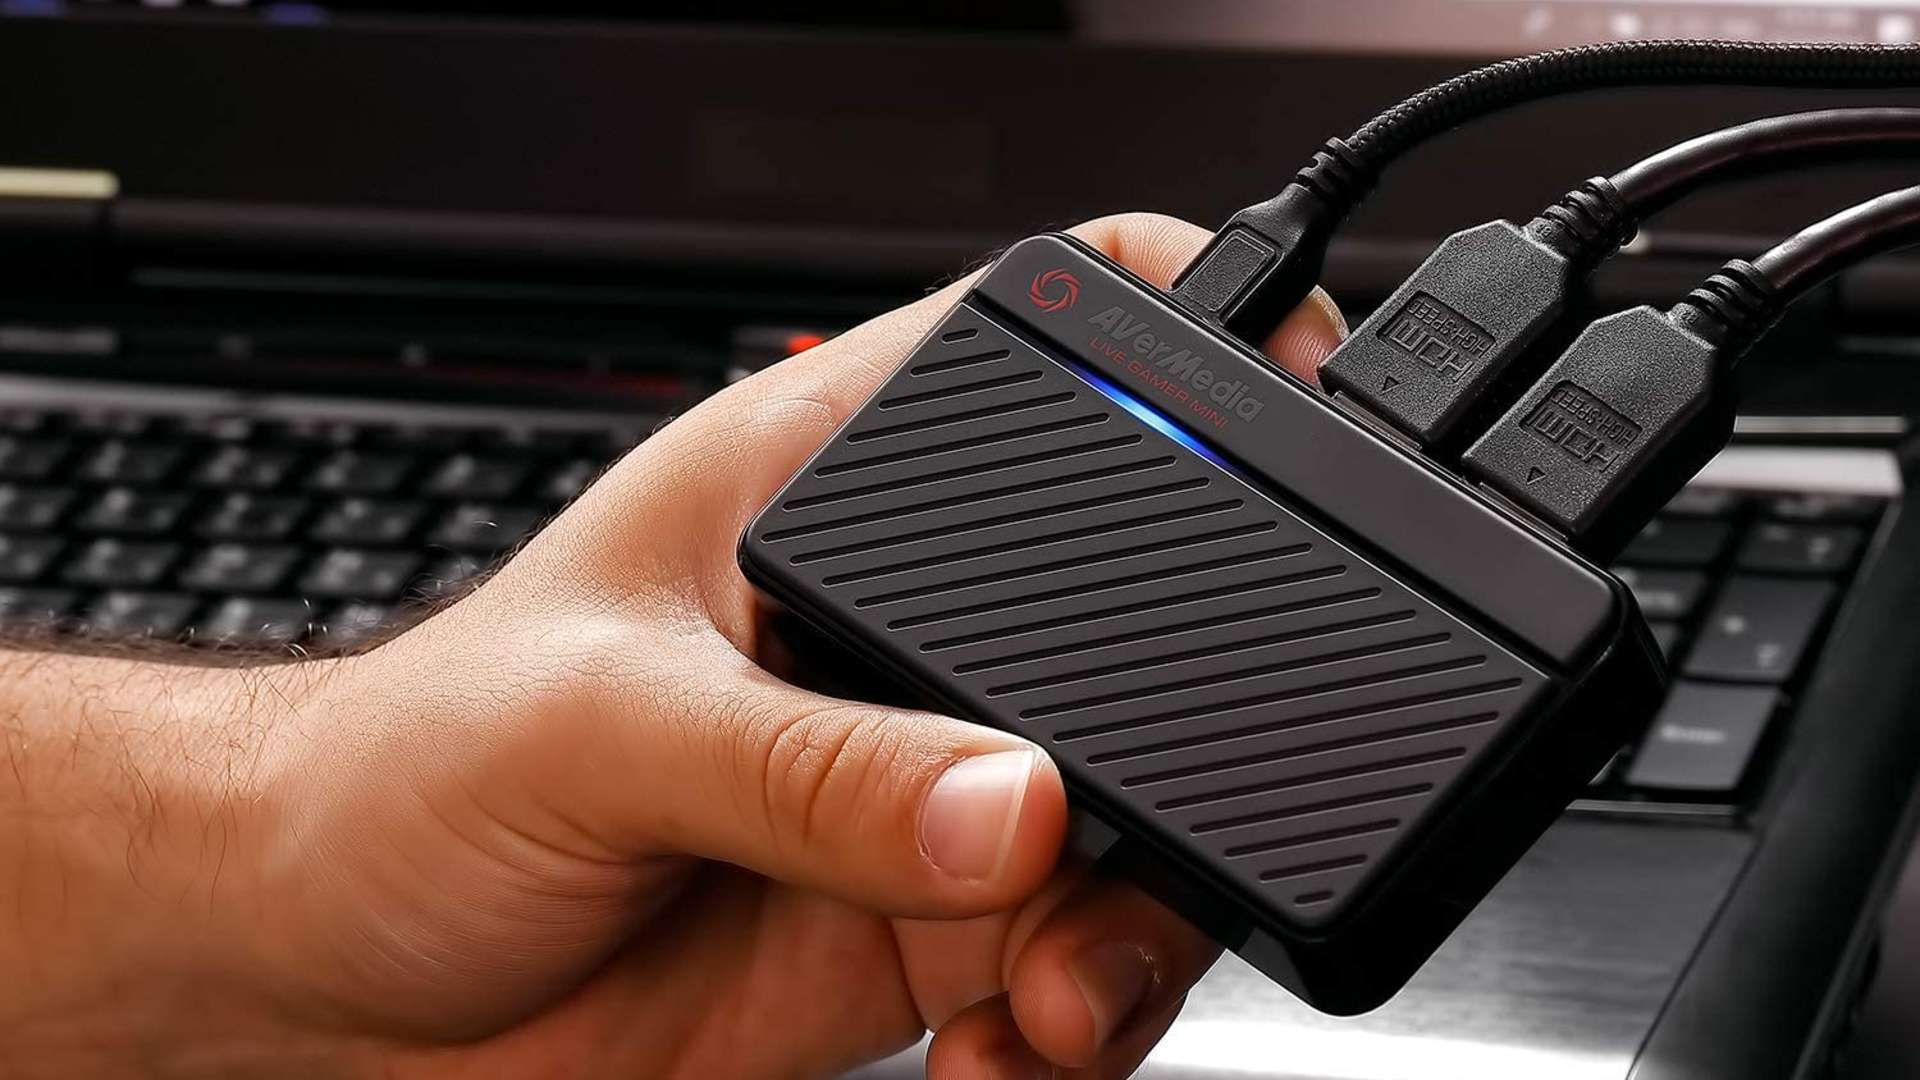 Avermedia’s HD capture card is up to 38% cheaper today